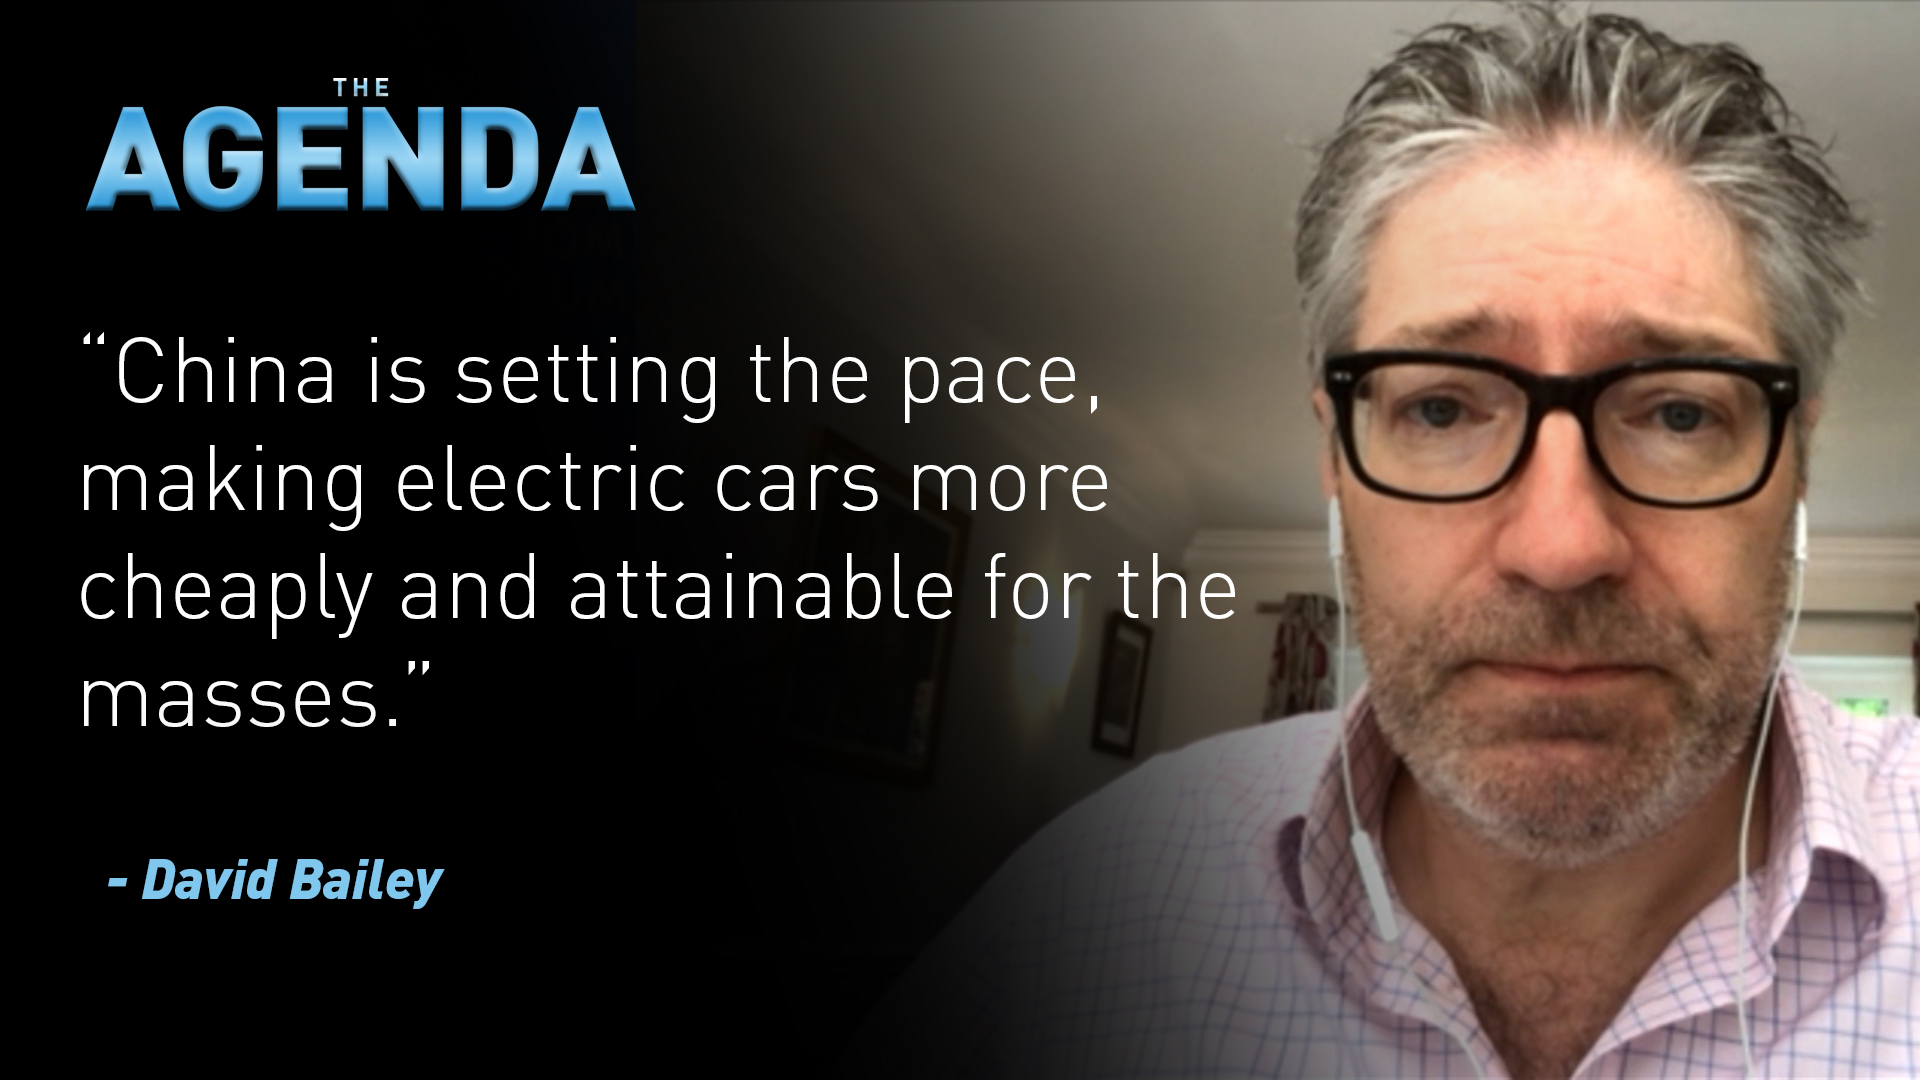 'China is setting the pace,' the future of Electric Vehicles - The Agenda full episode